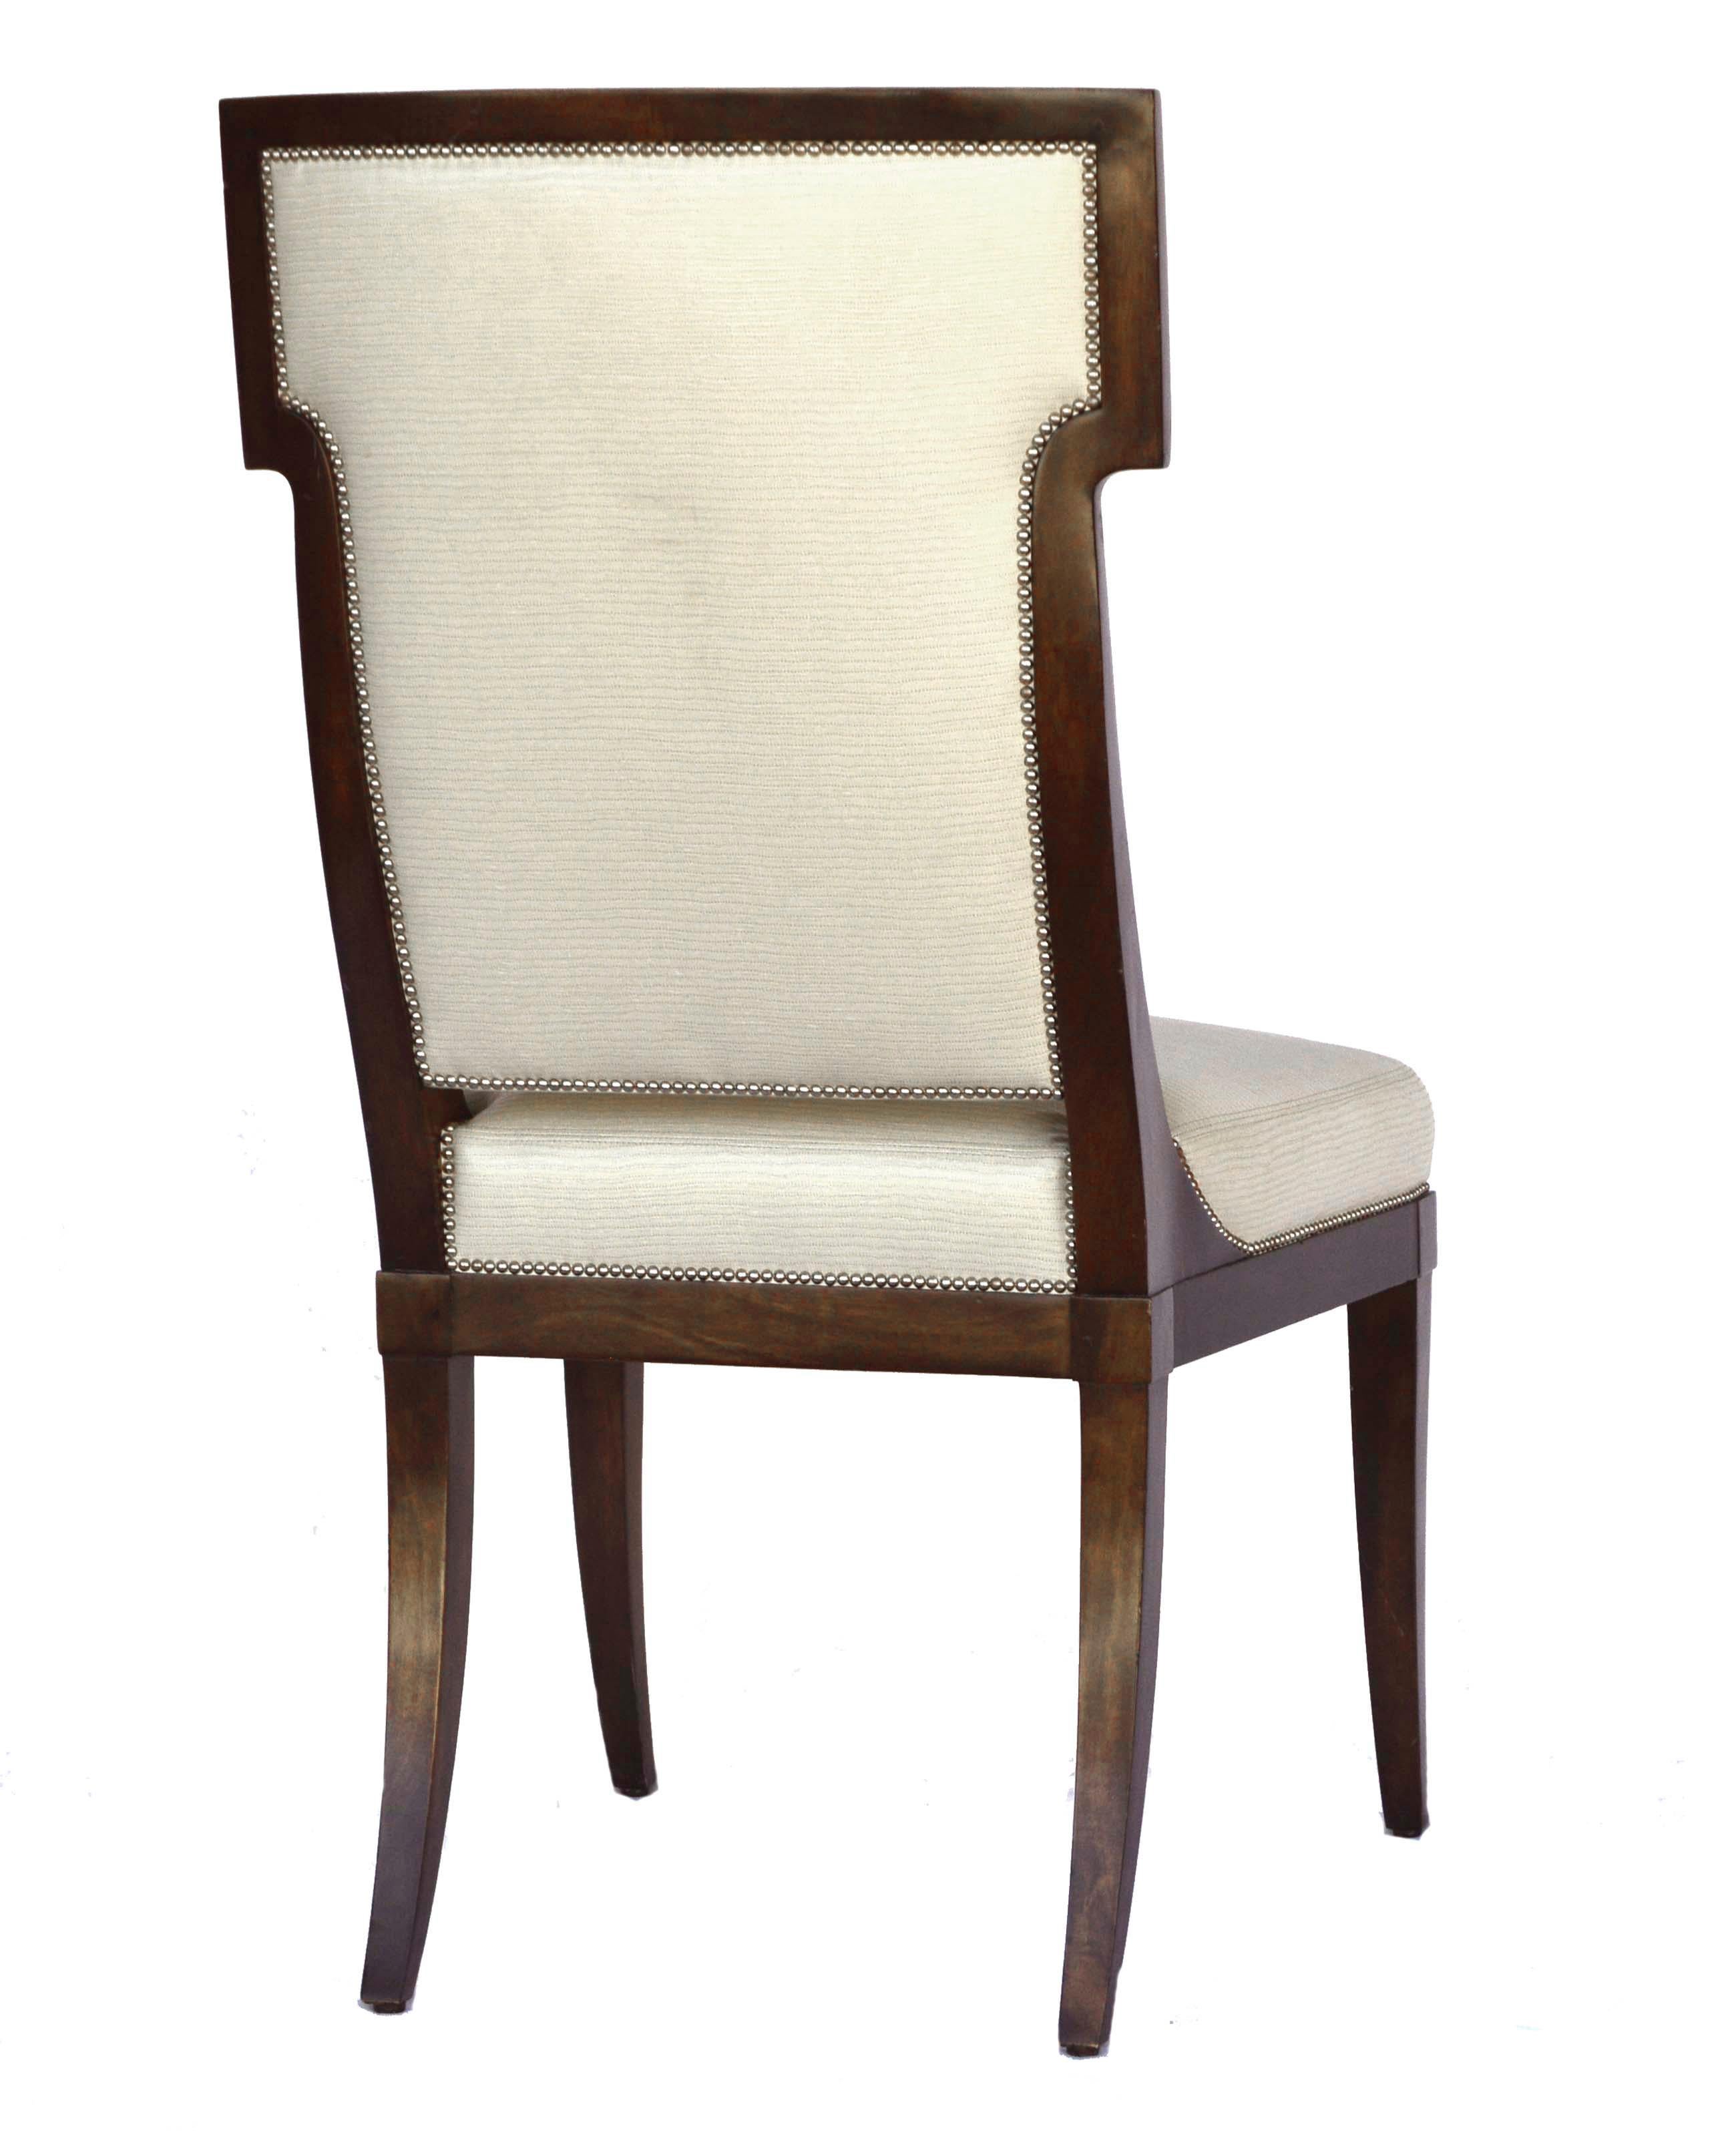 Art Deco Andre Arbus Collection, Pair of Side Chairs Sale